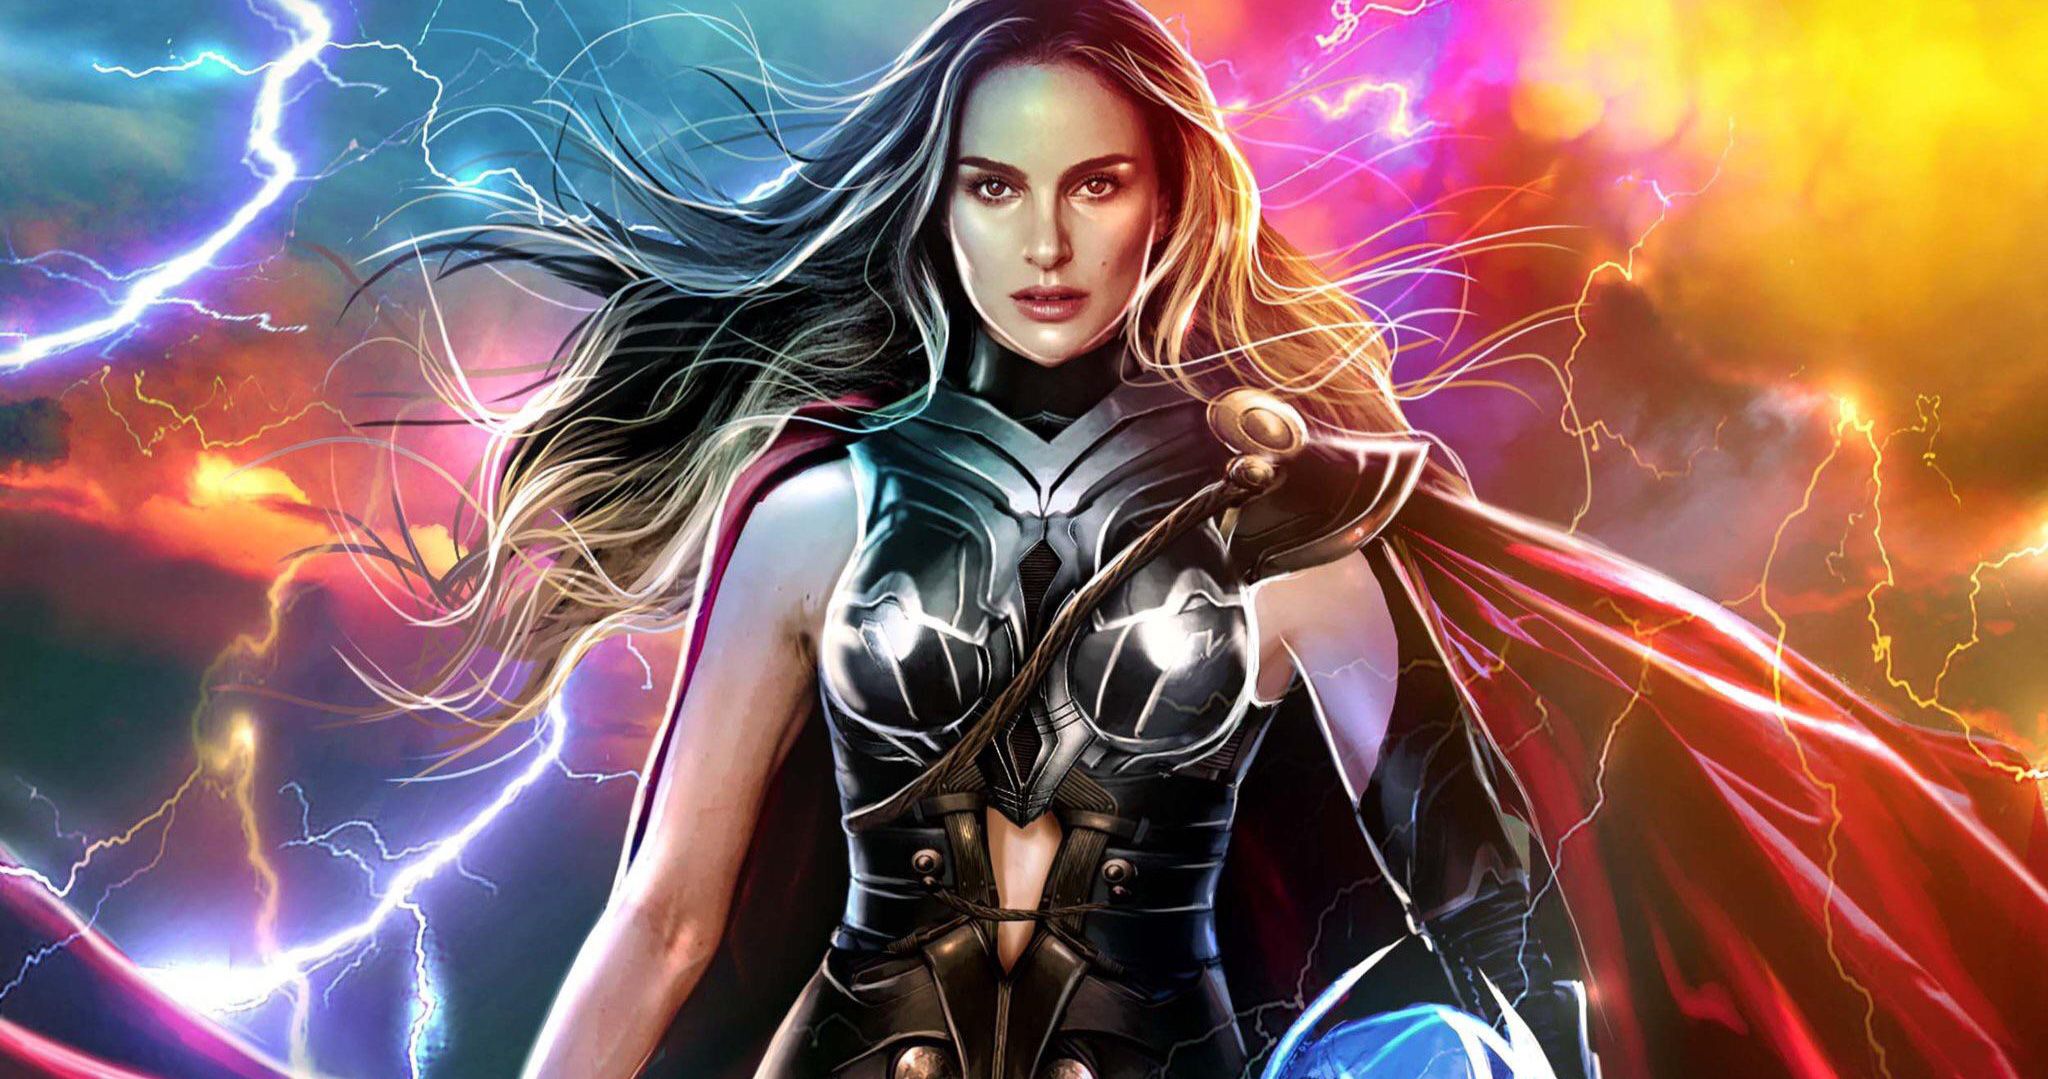 Thor: Love and Thunder Training Has Changed Natalie Portman: It's So Wild to Feel Strong